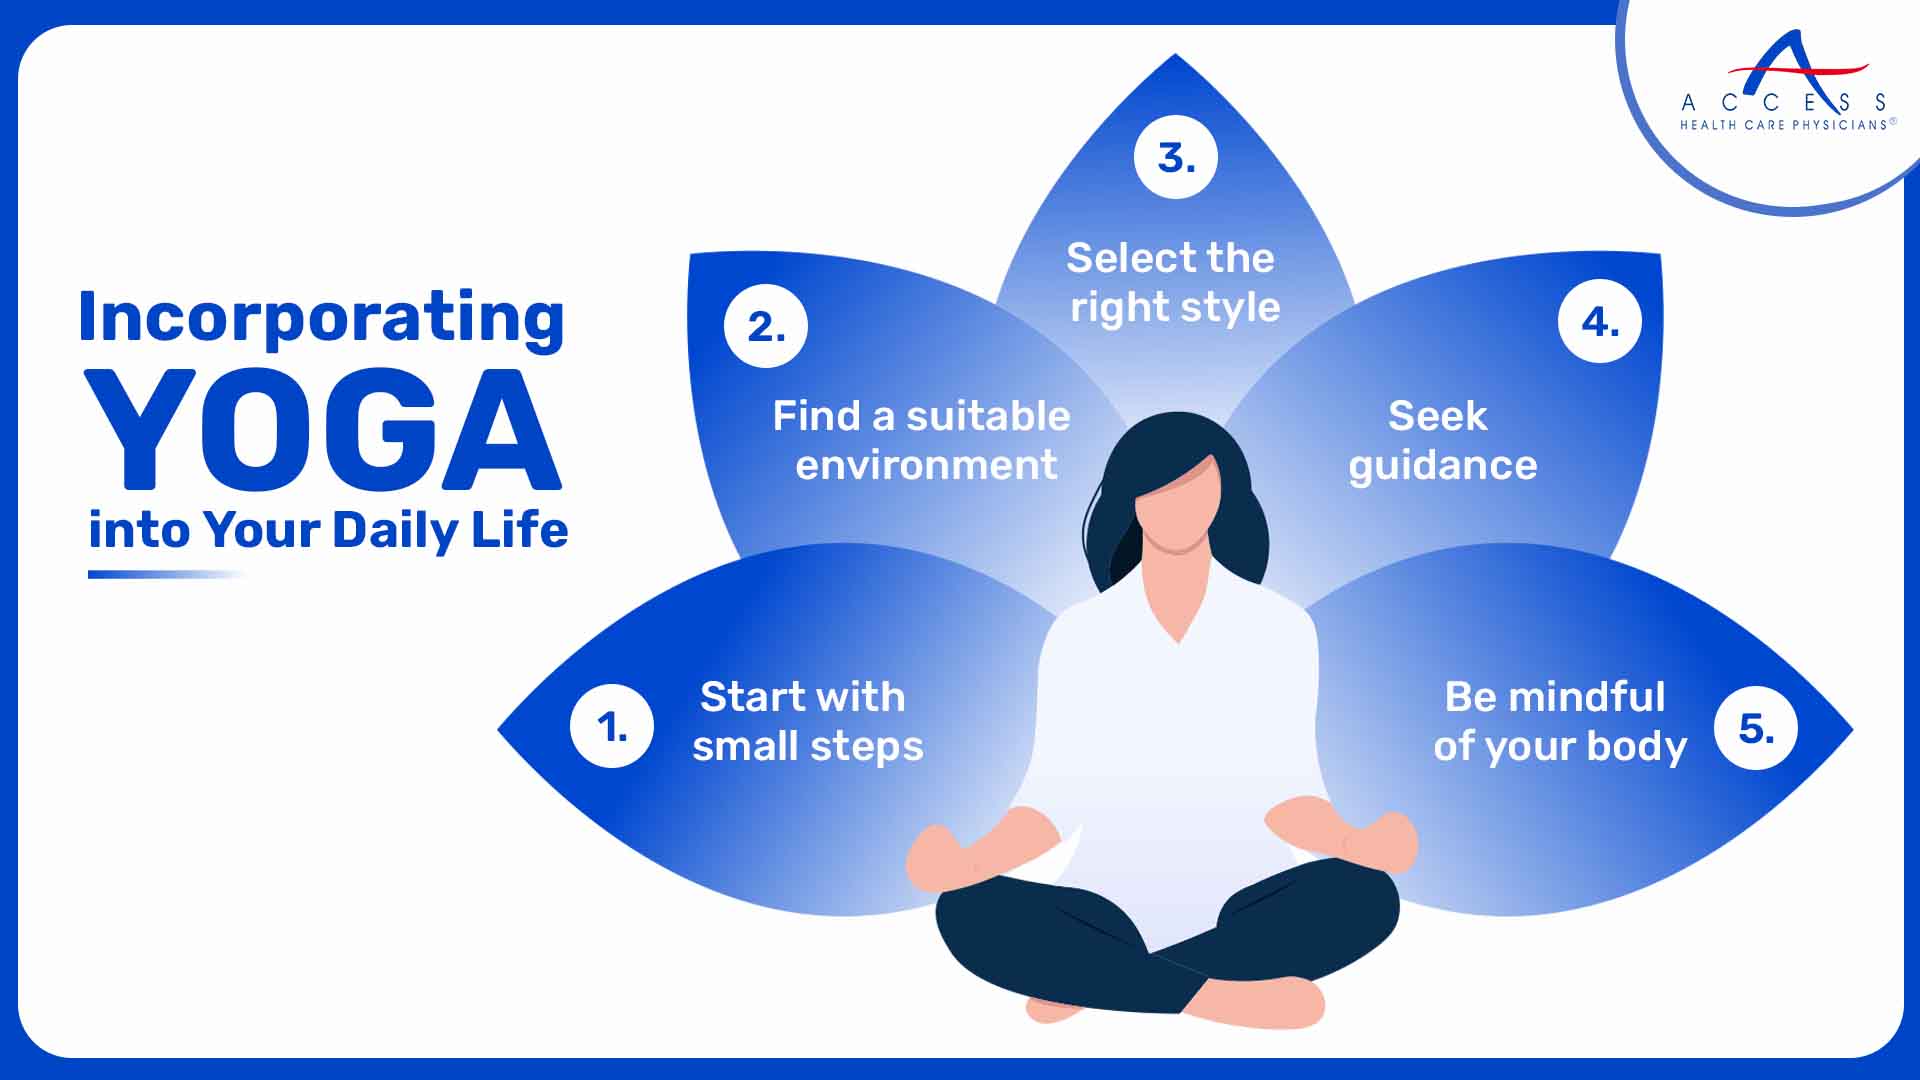 Incorporating Yoga into Your Daily Life